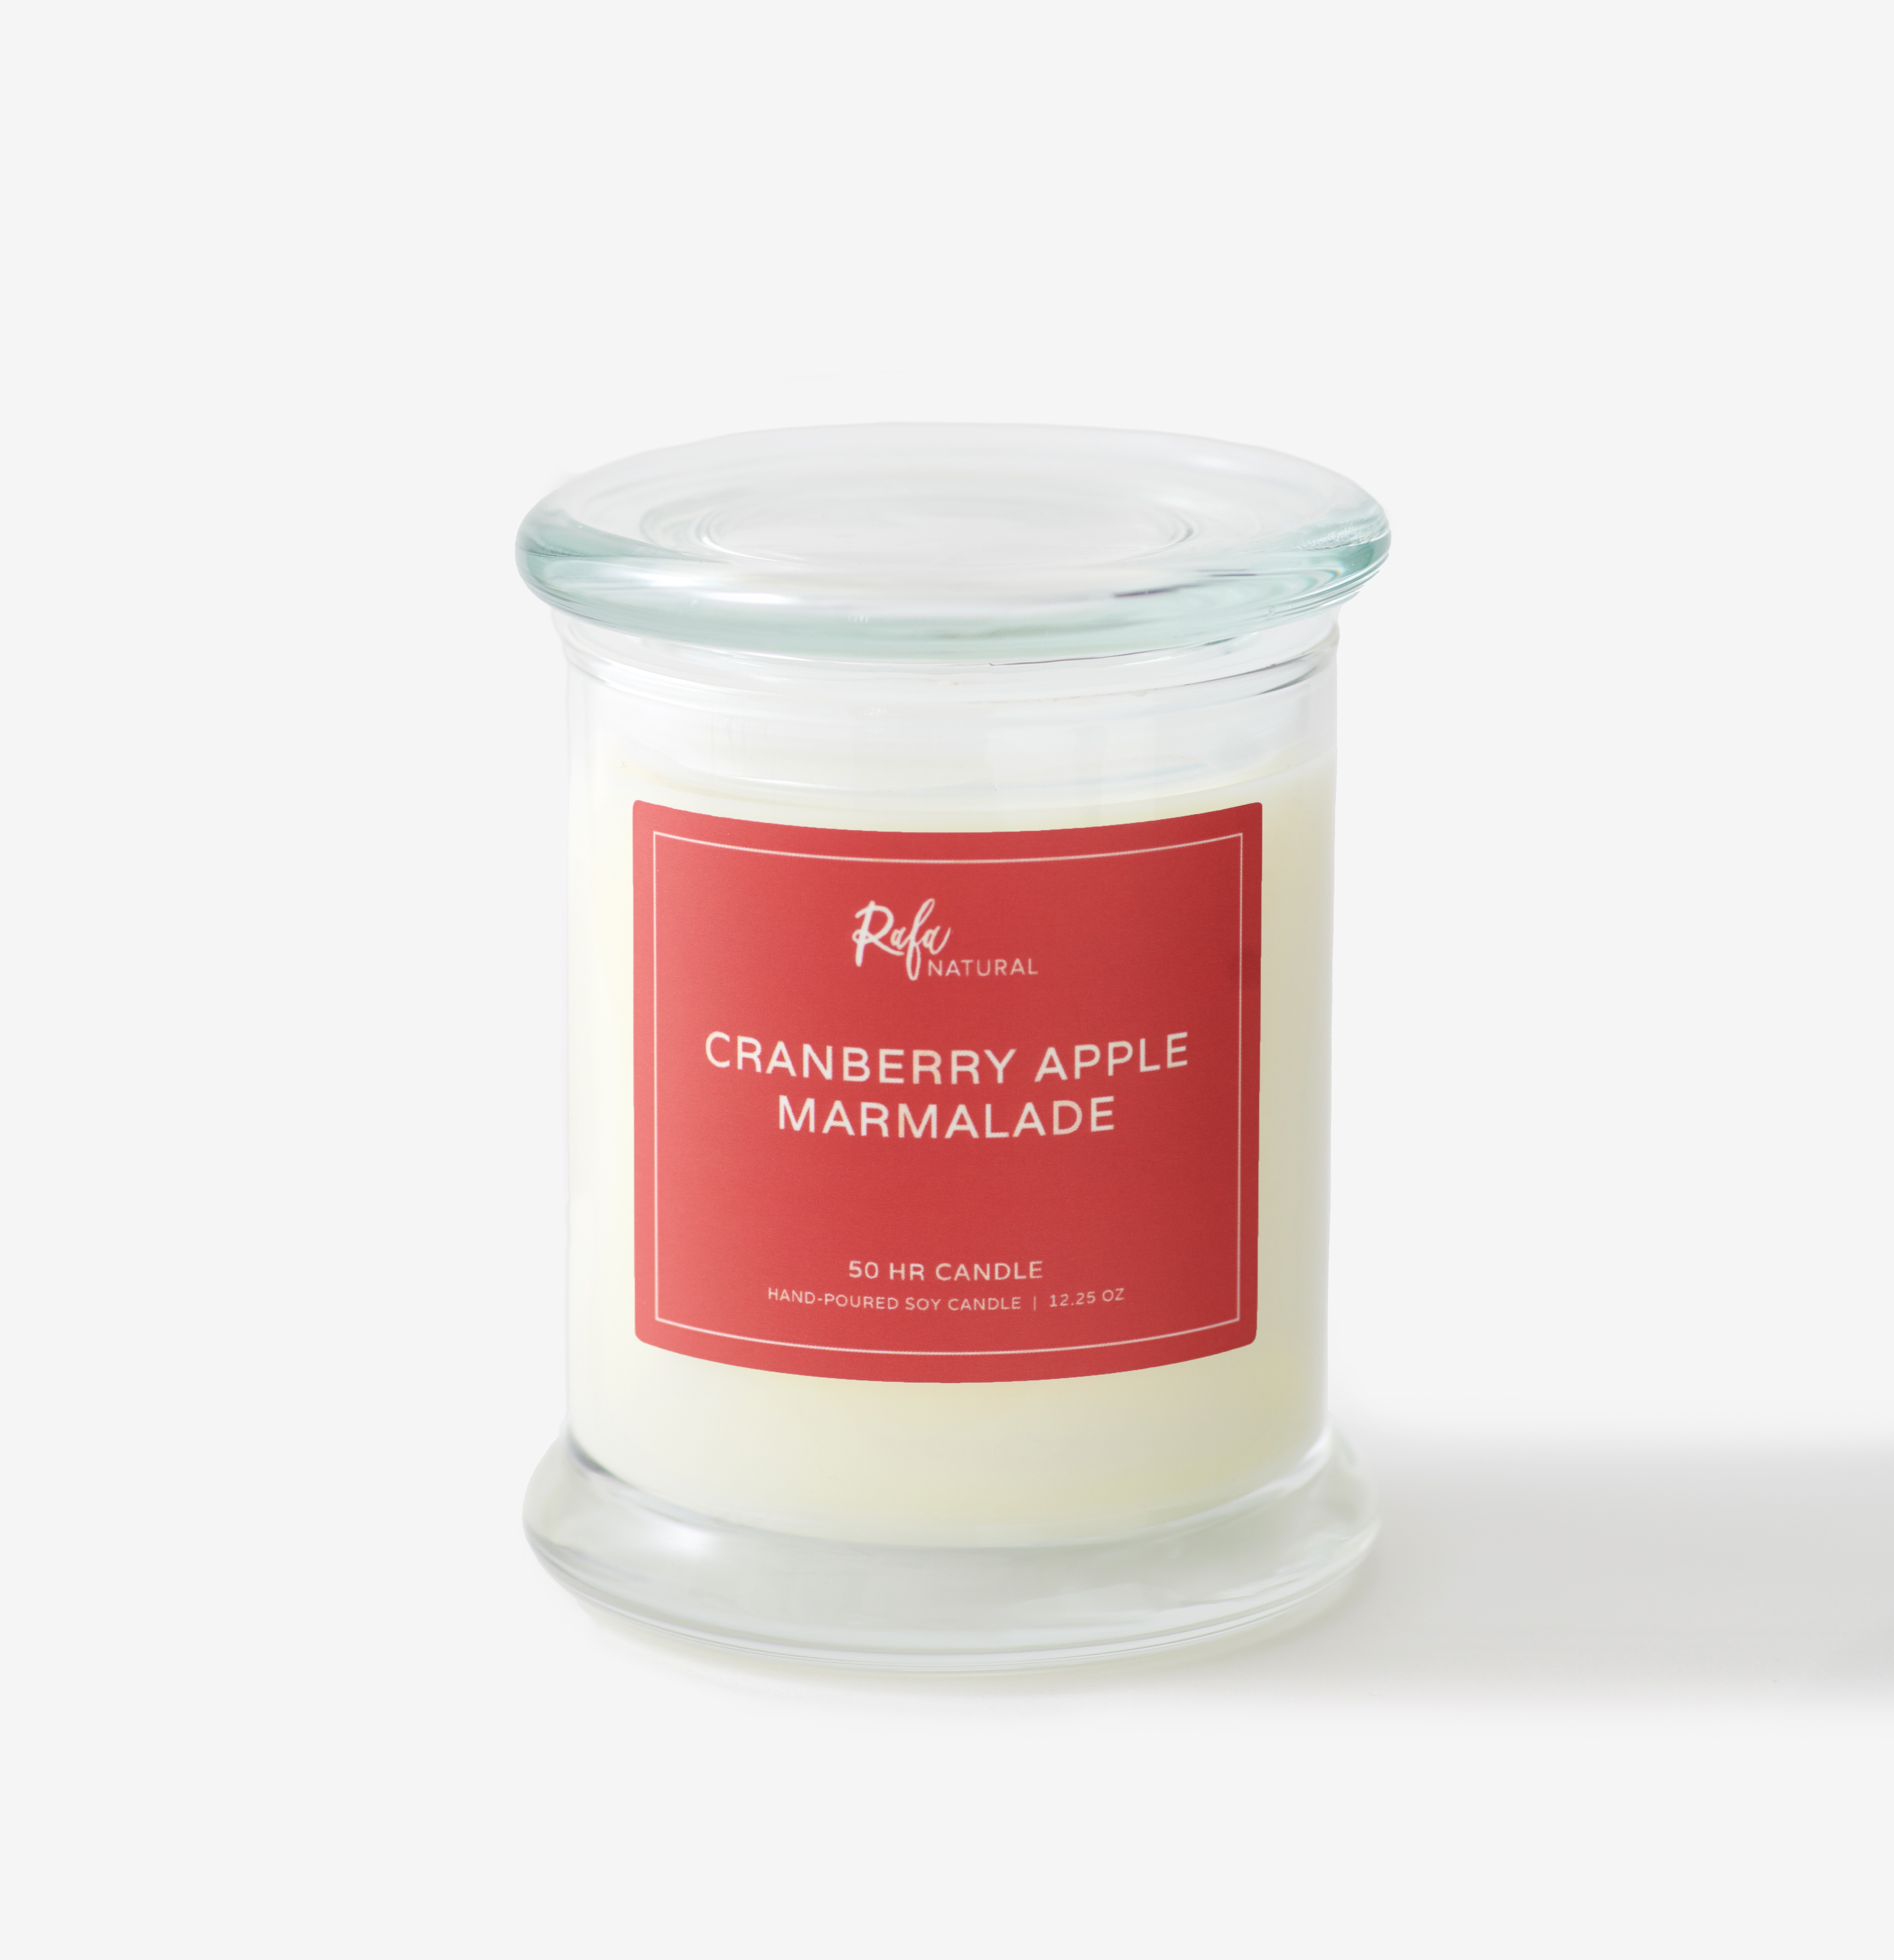 Cranberry Apple Marmalade 50Hr Soy Candle by Rafa Natural